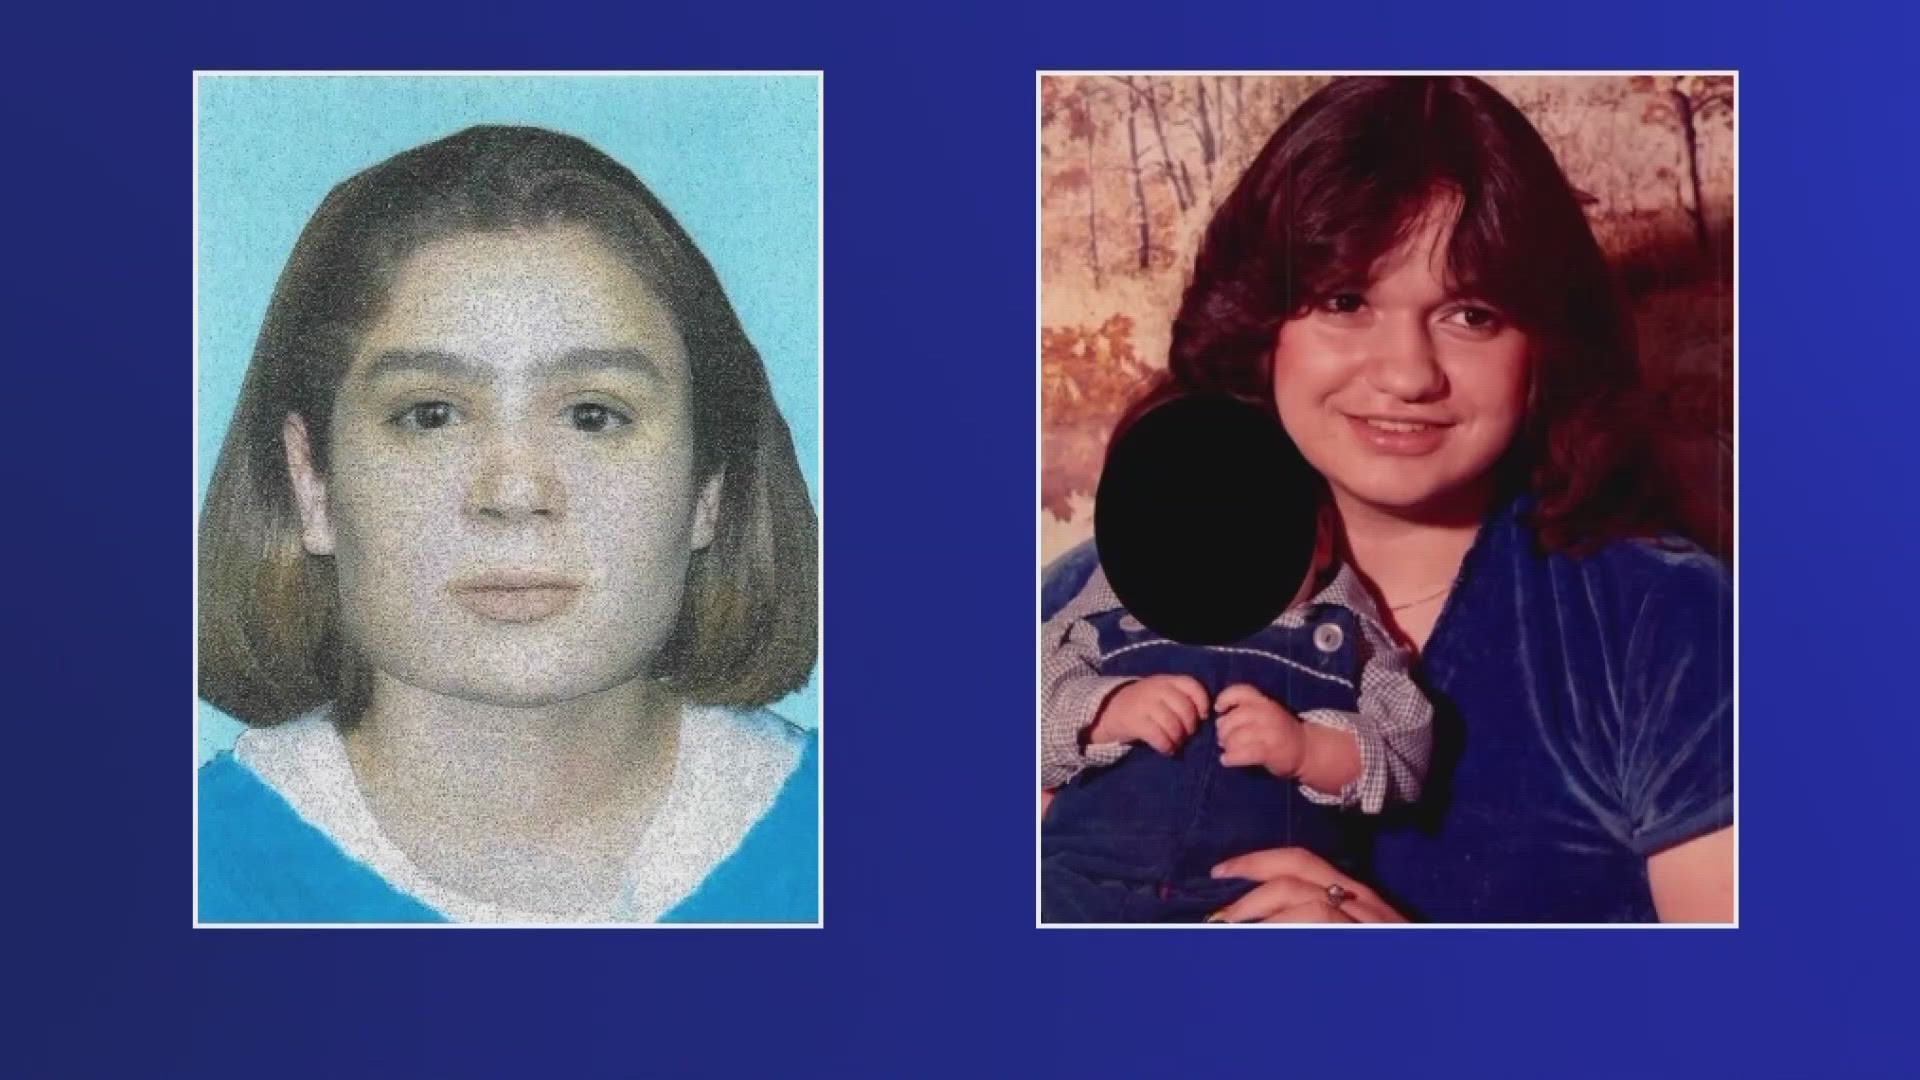 In August 1986, 22-year-old Paula Boudreaux disappeared from Golden Meadow in Lafourche Parish, leaving behind a 4-year-old son.